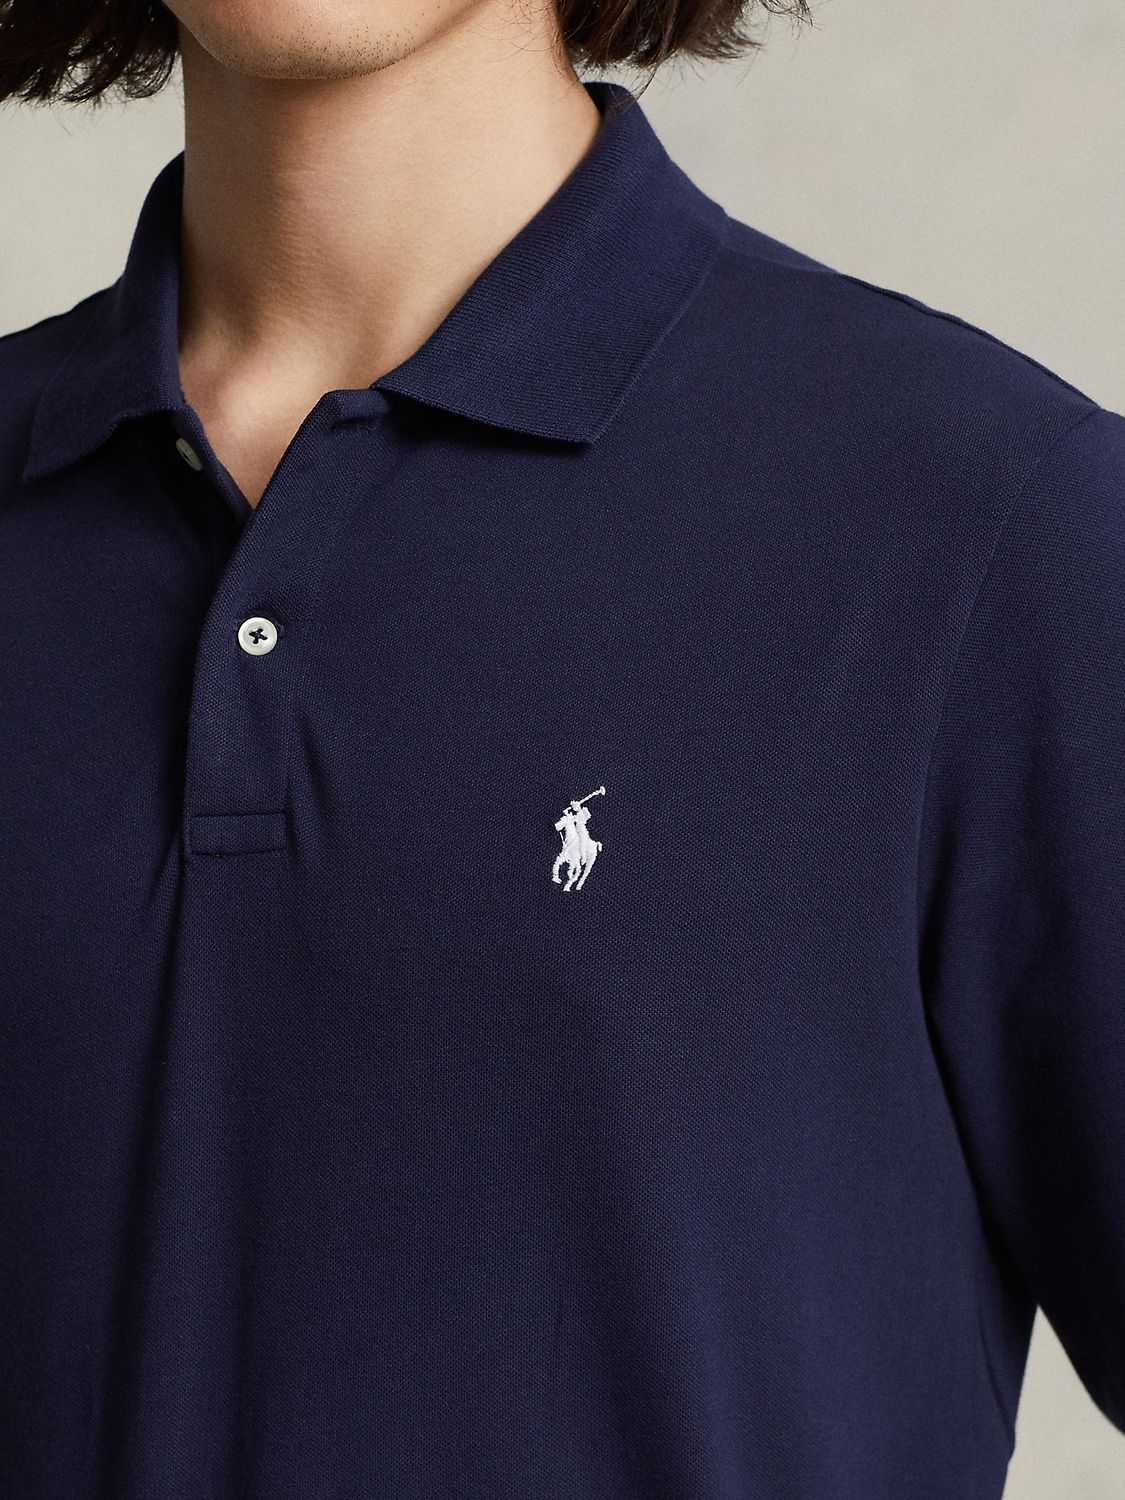 Polo Golf by Ralph Lauren Polo Shirt, French Navy at John Lewis & Partners